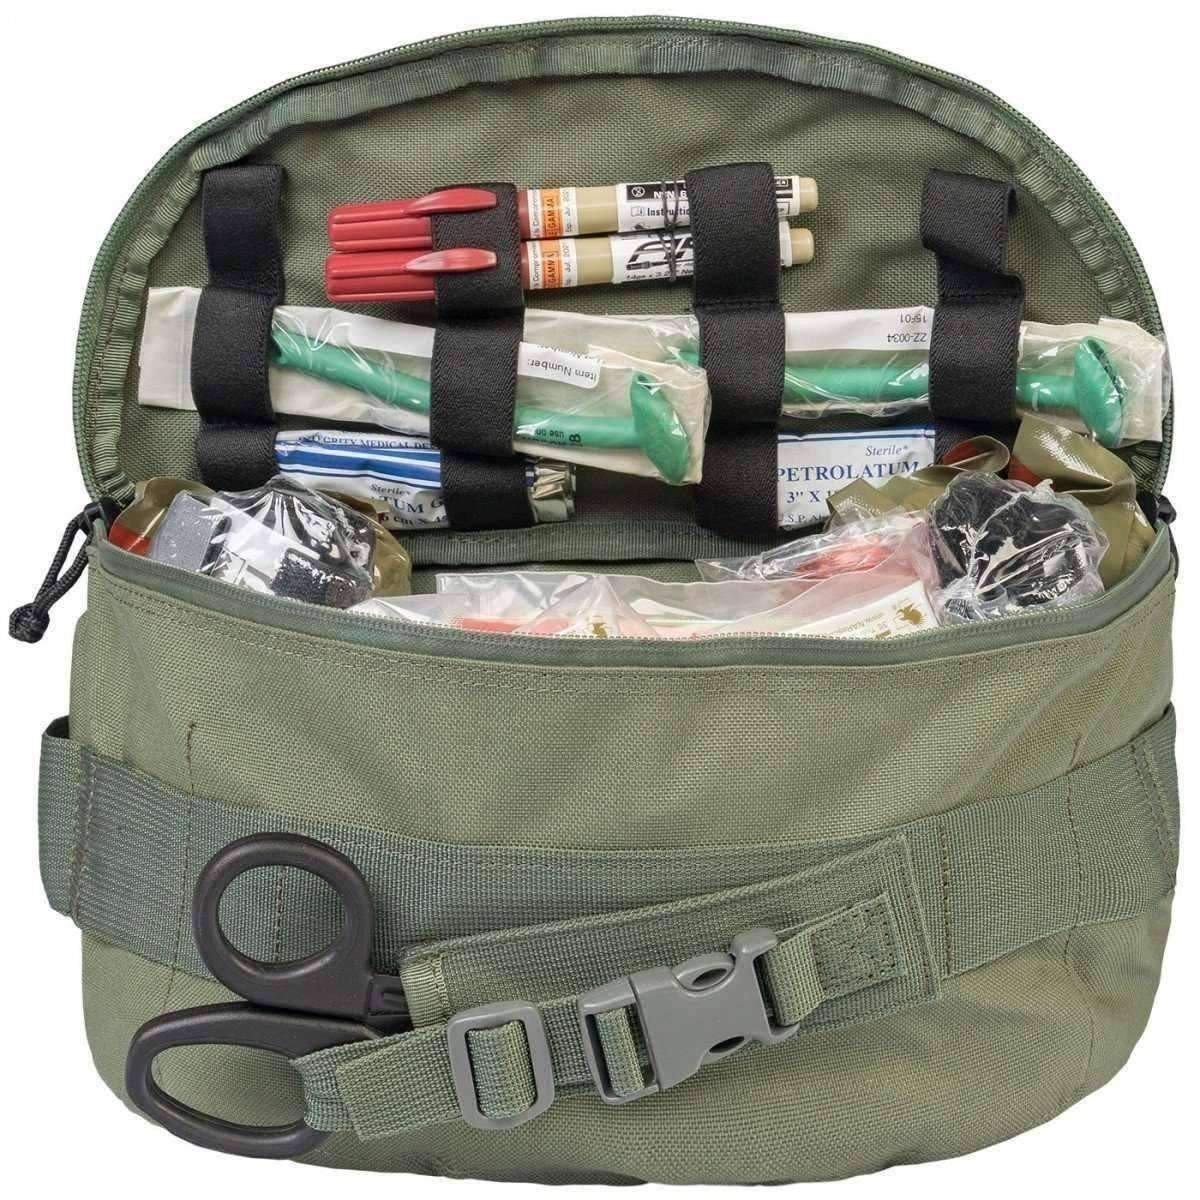 High Risk Warrant Casualty Kit - MED-TAC International Corp. - North American Rescue